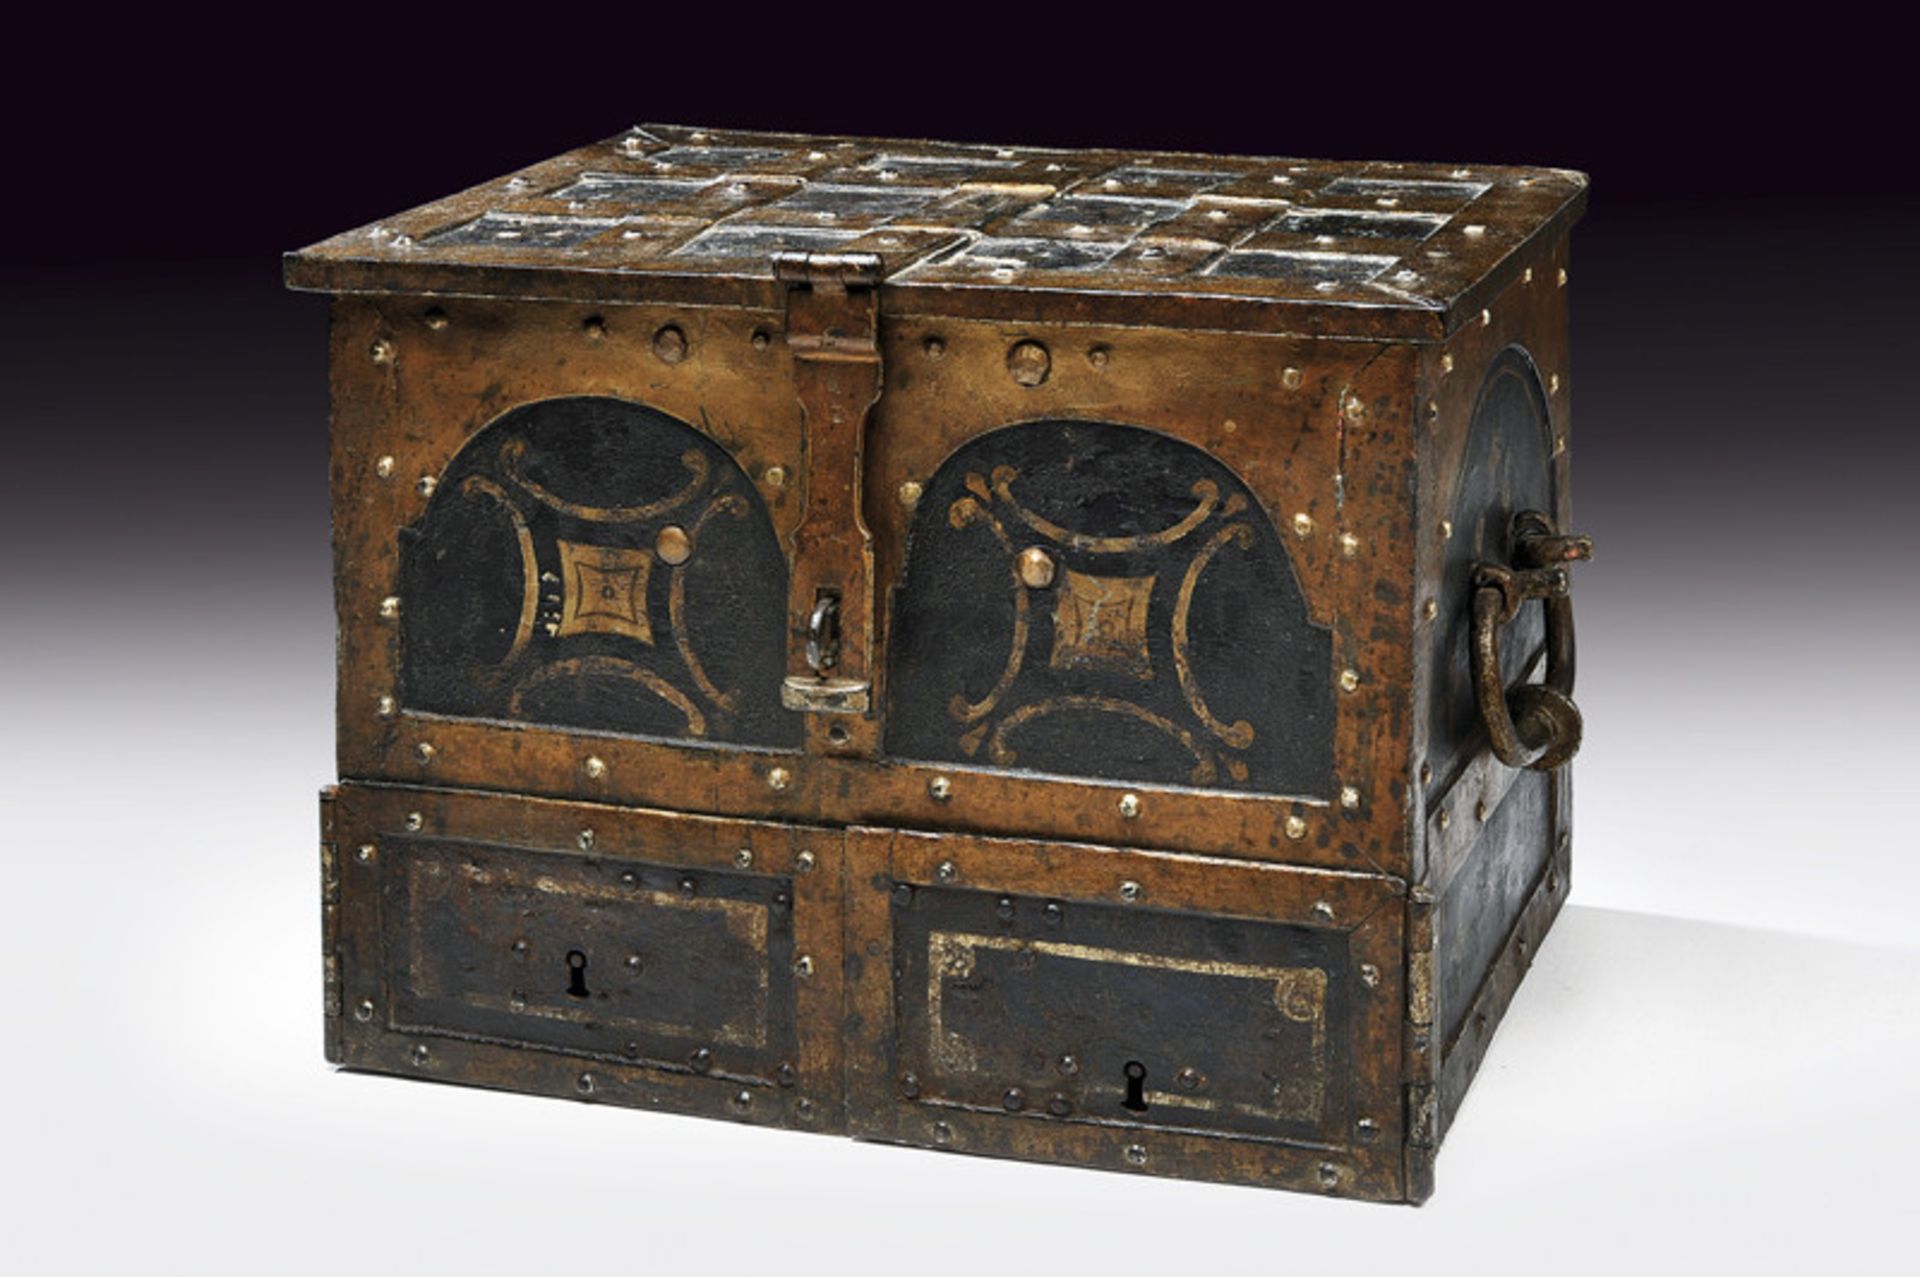 A travelling iron strong-box, dating: 18th Century, provenance: Europe, dating: 18th Century,